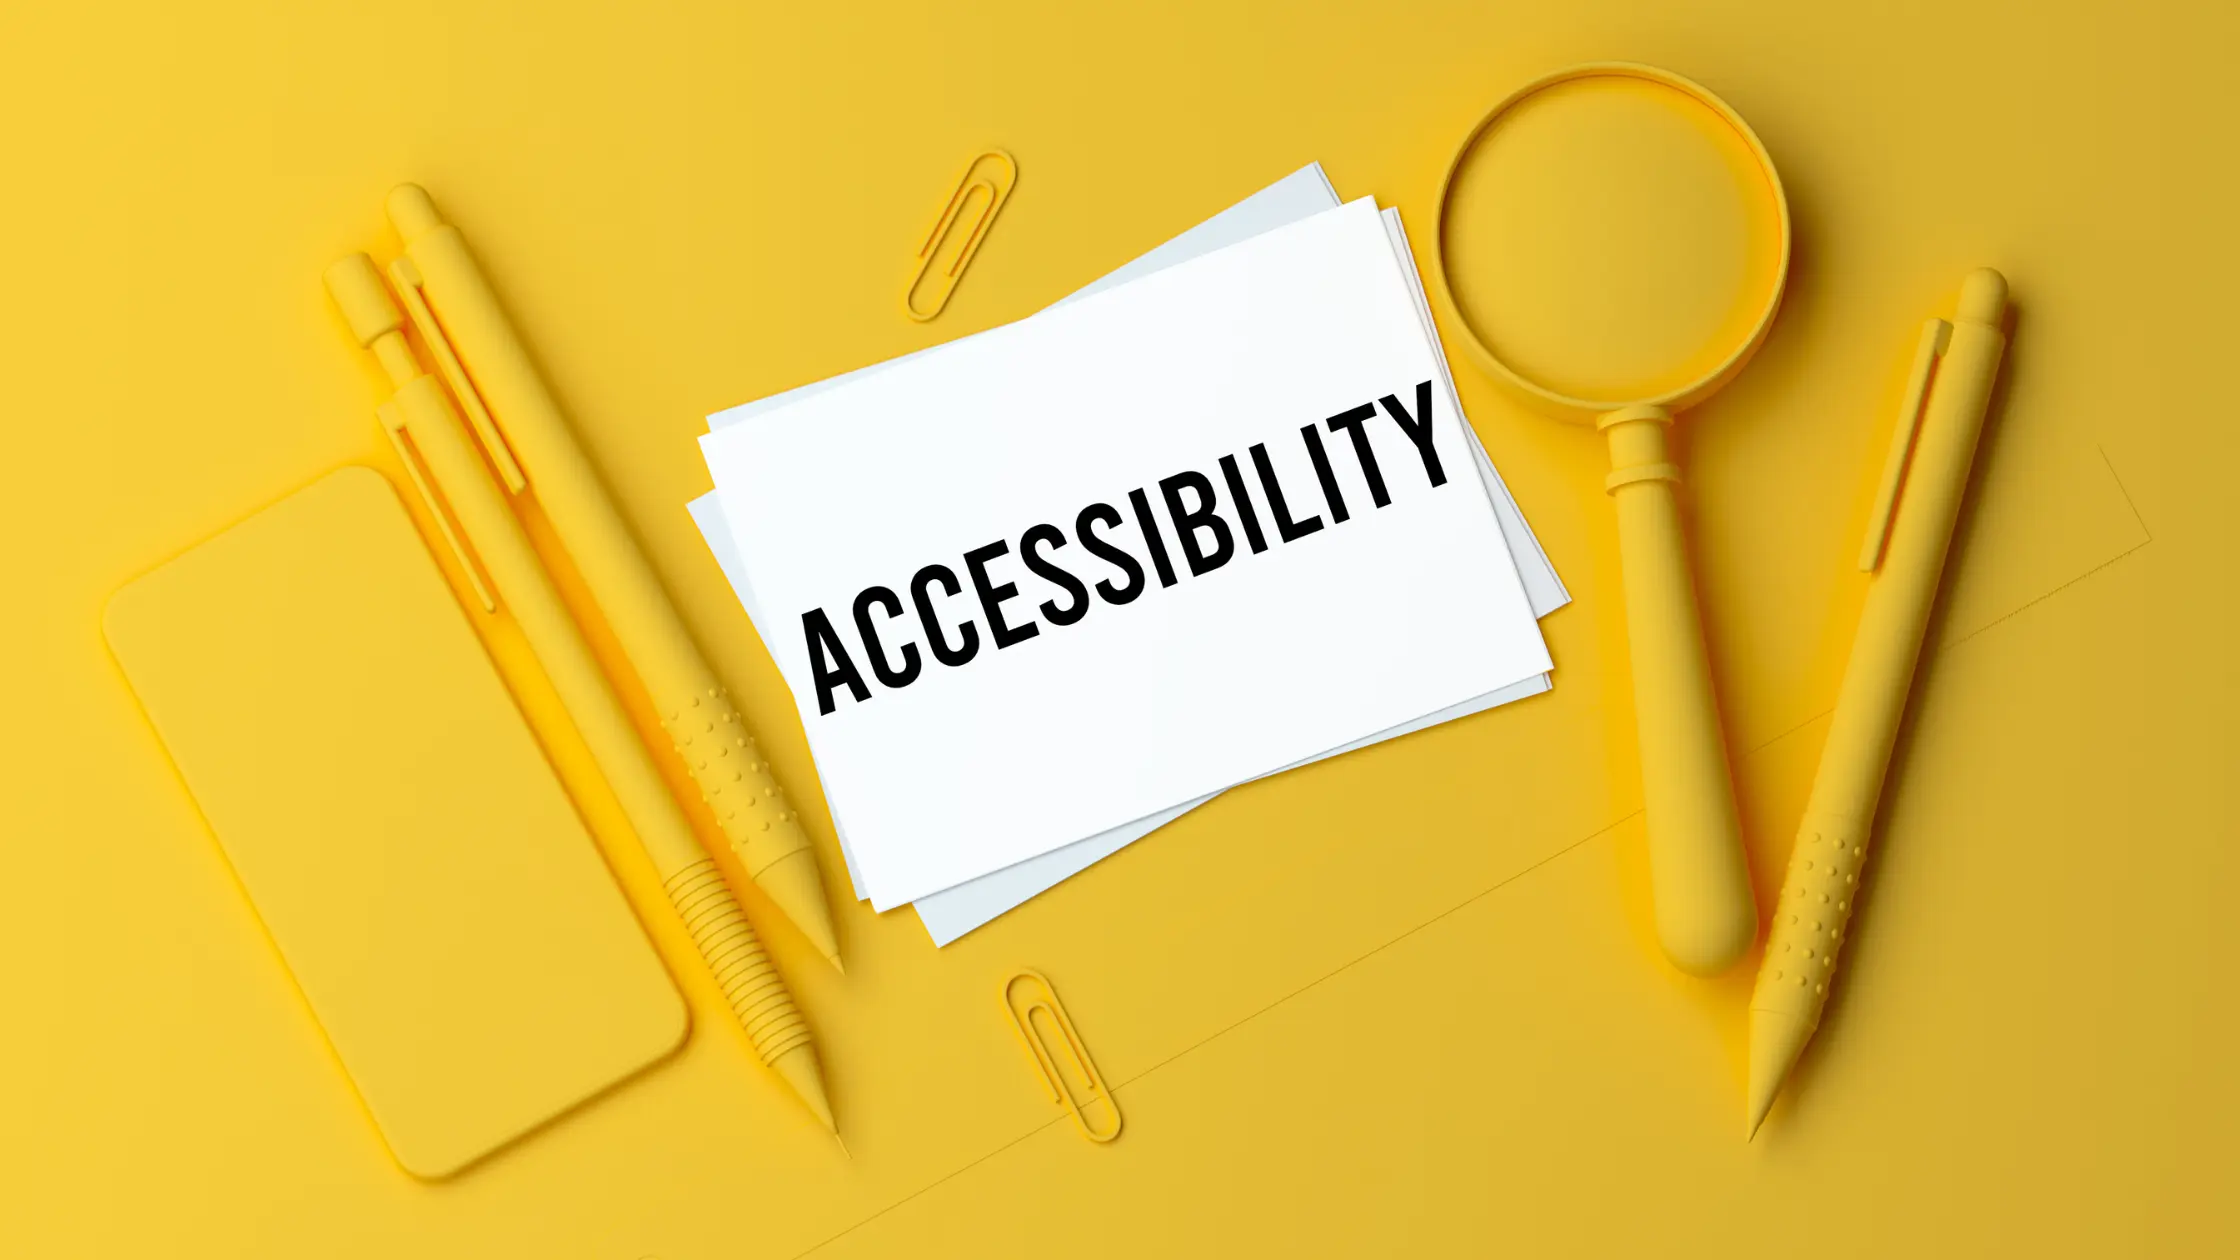 The Role of Accessibility in Web Design